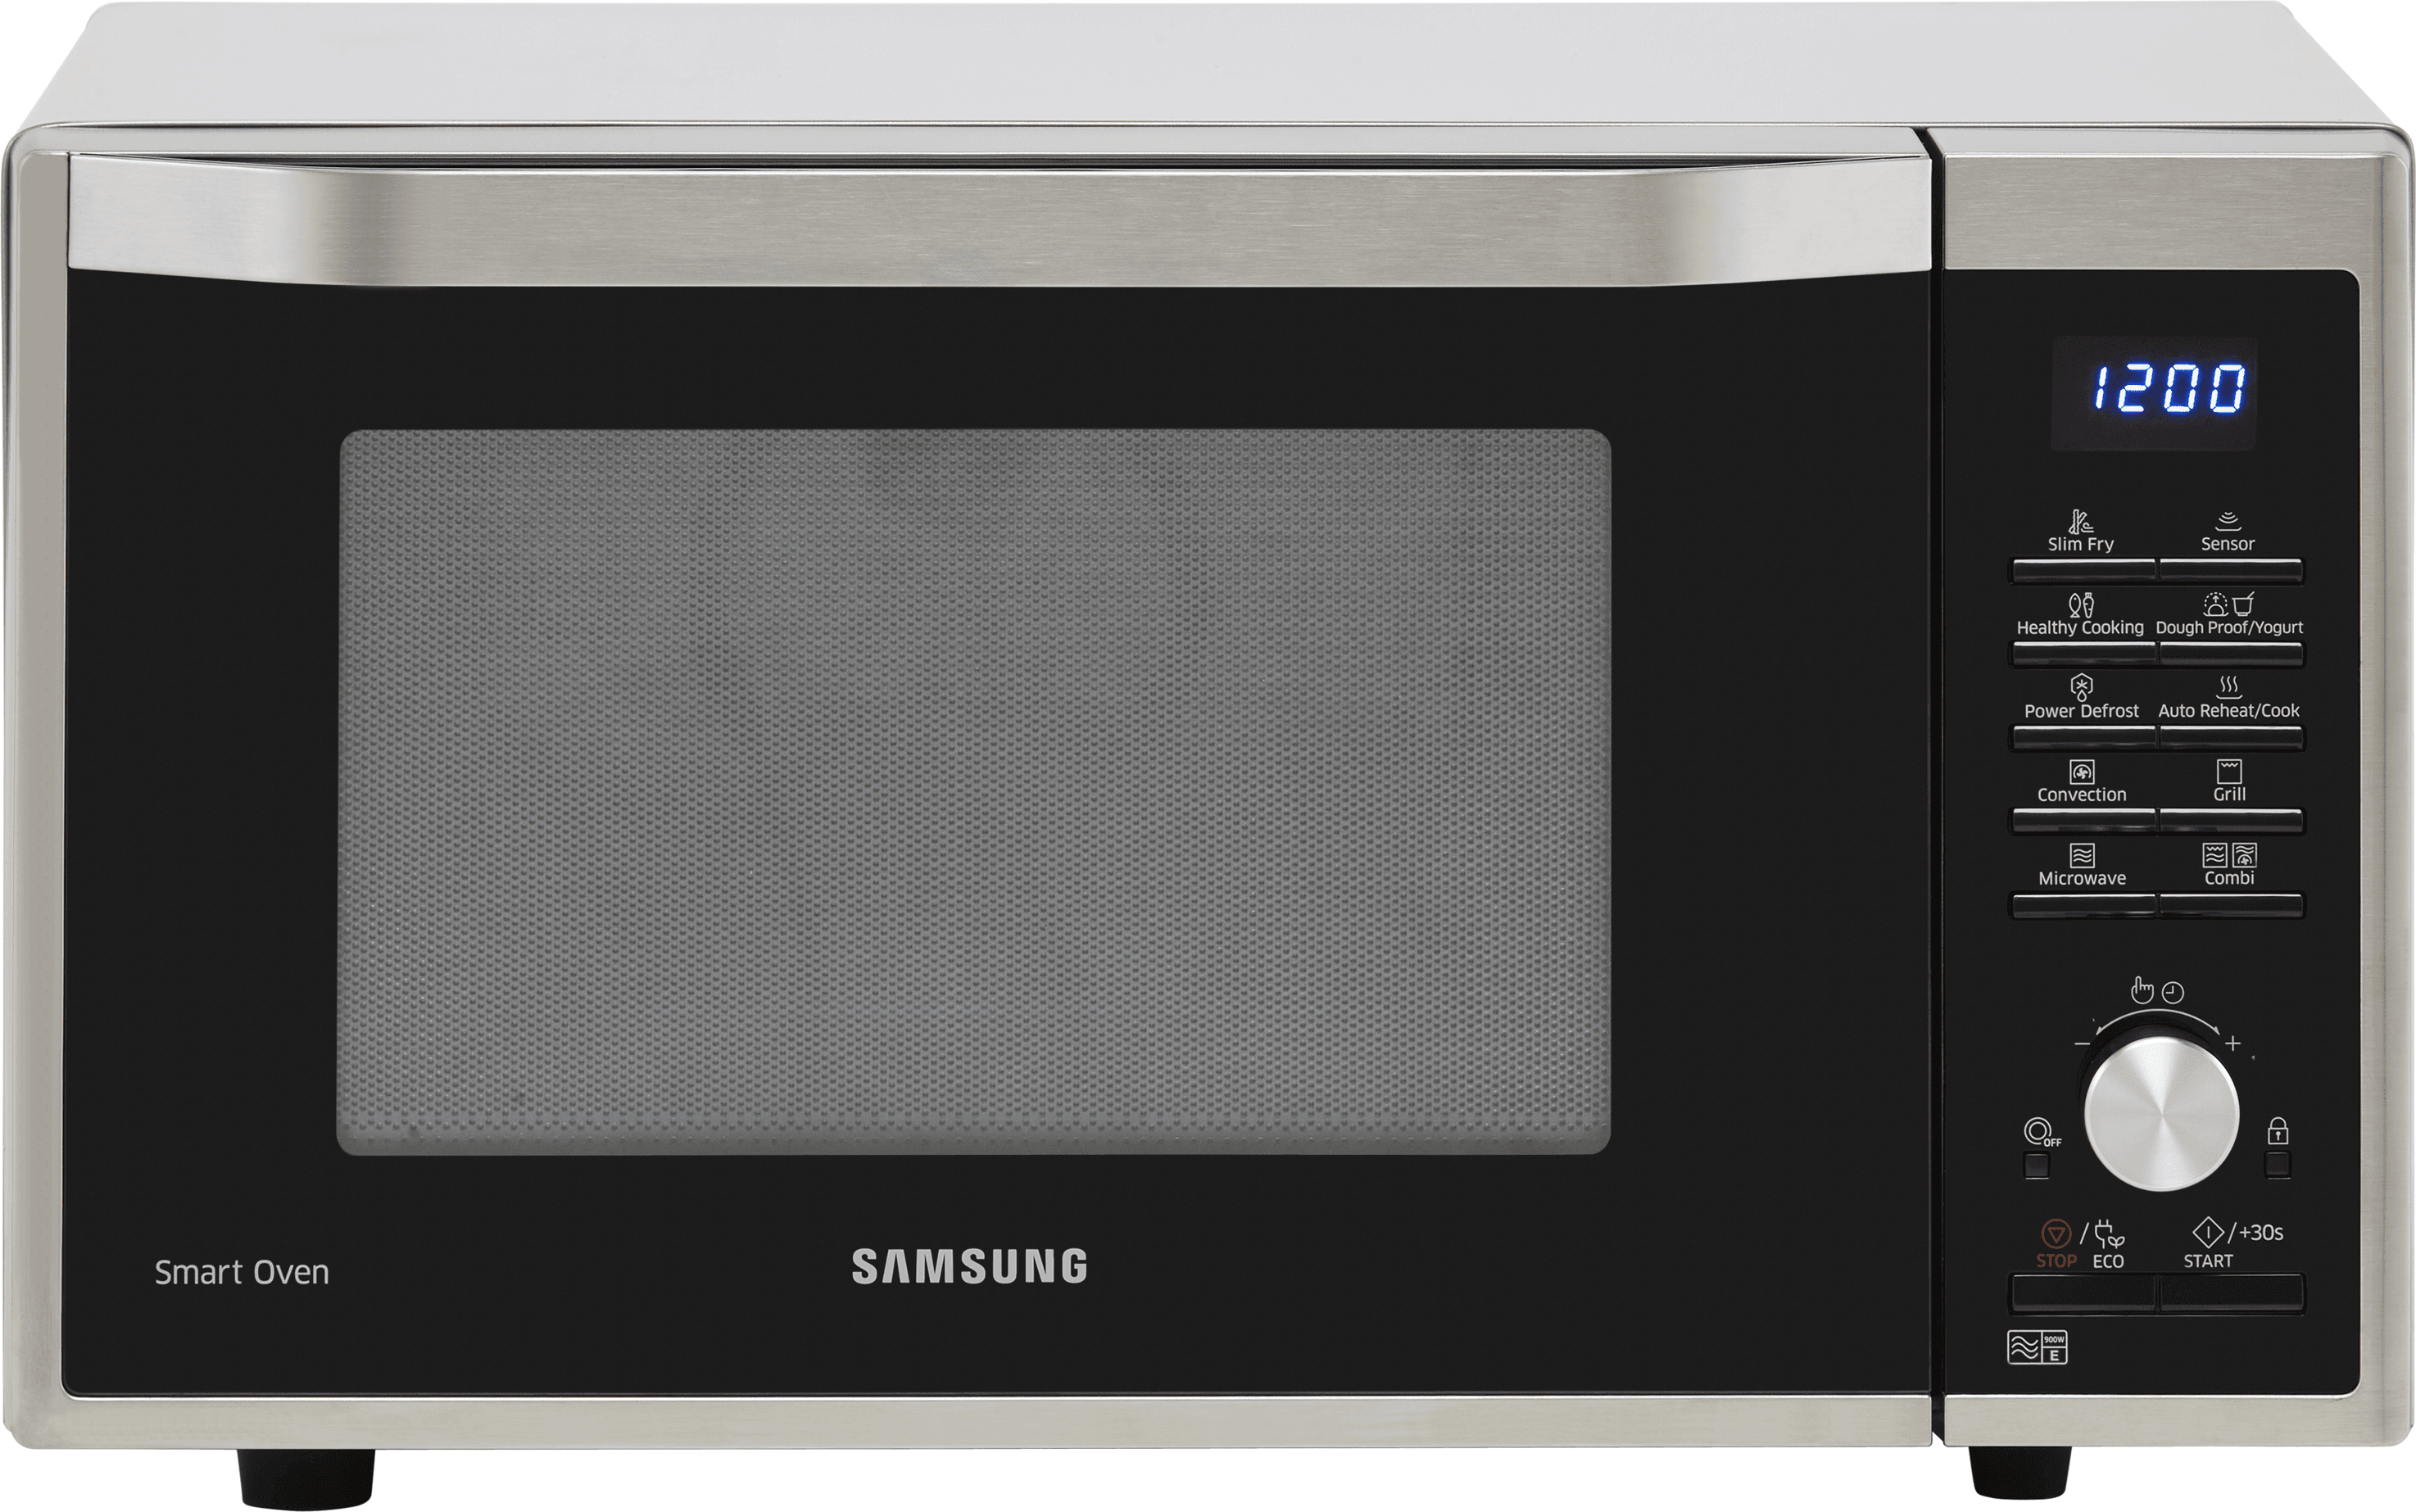 Samsung MC32J7055CT 31cm tall, 52cm wide, Freestanding Microwave - Stainless Steel, Stainless Steel